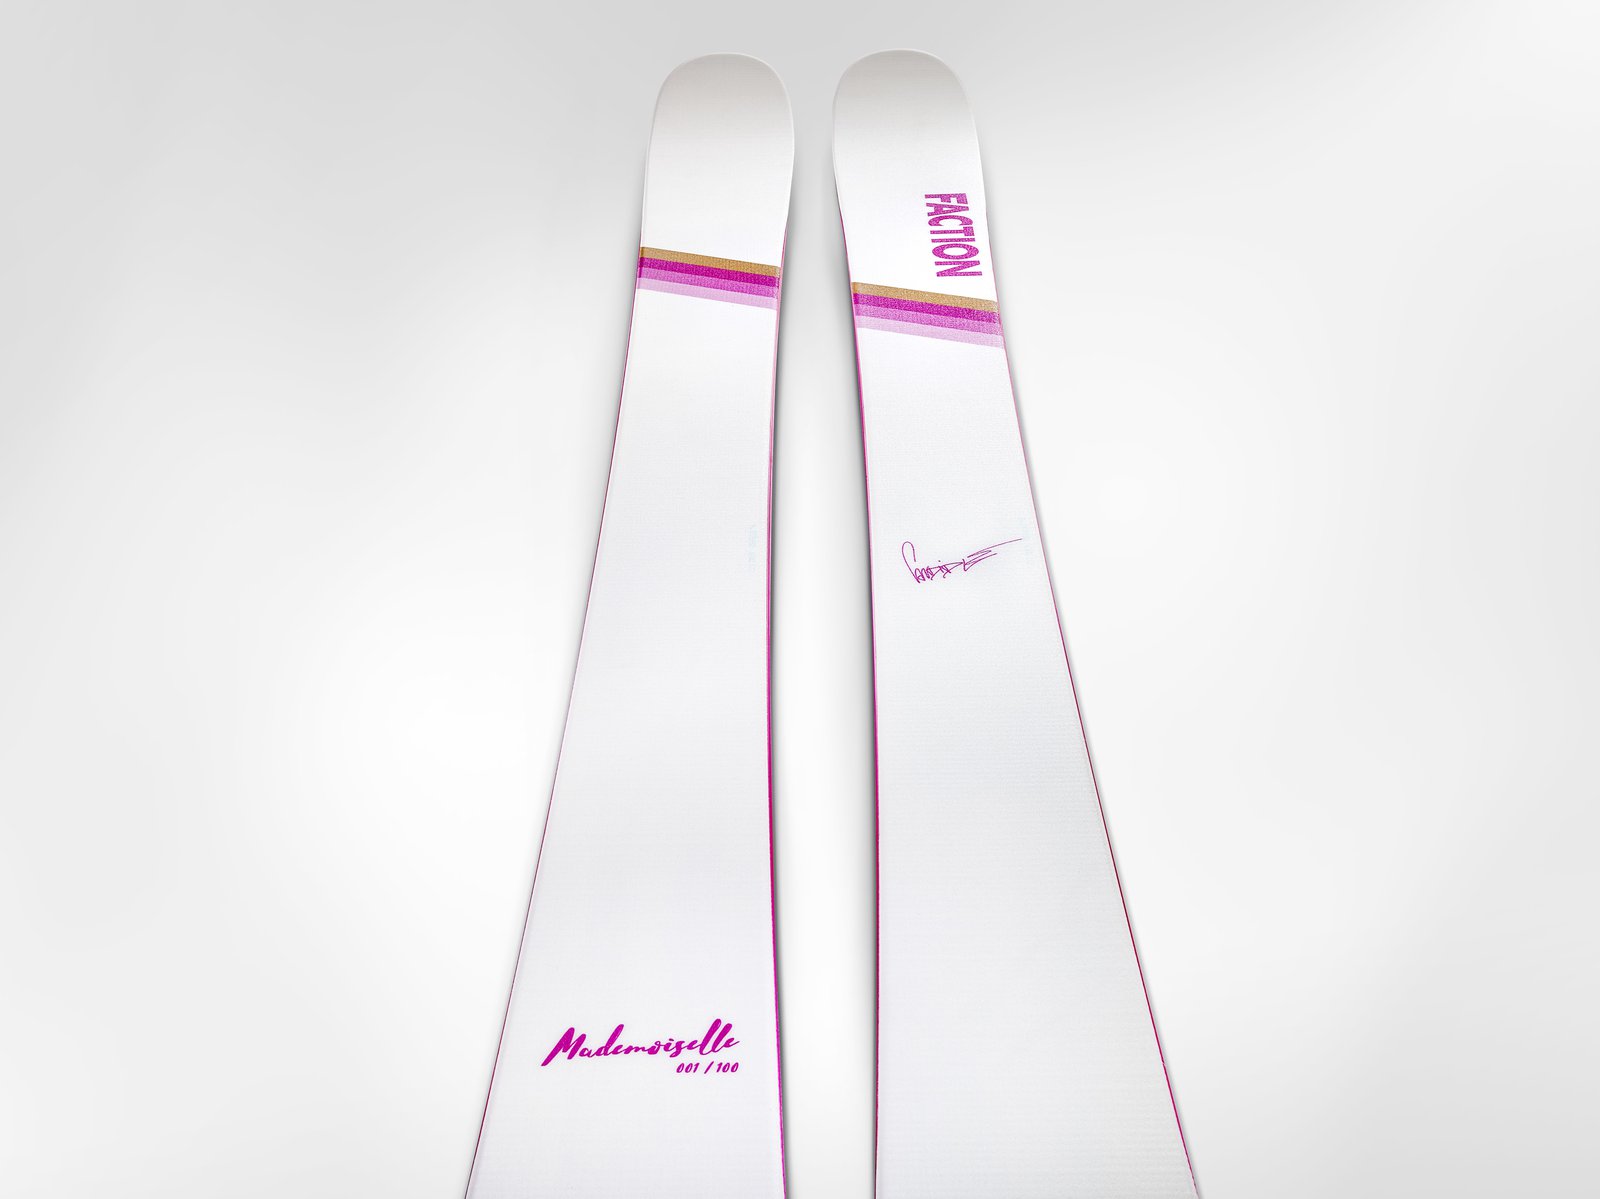 Introducing the Candide Thovex 2.0x Mademoiselle.